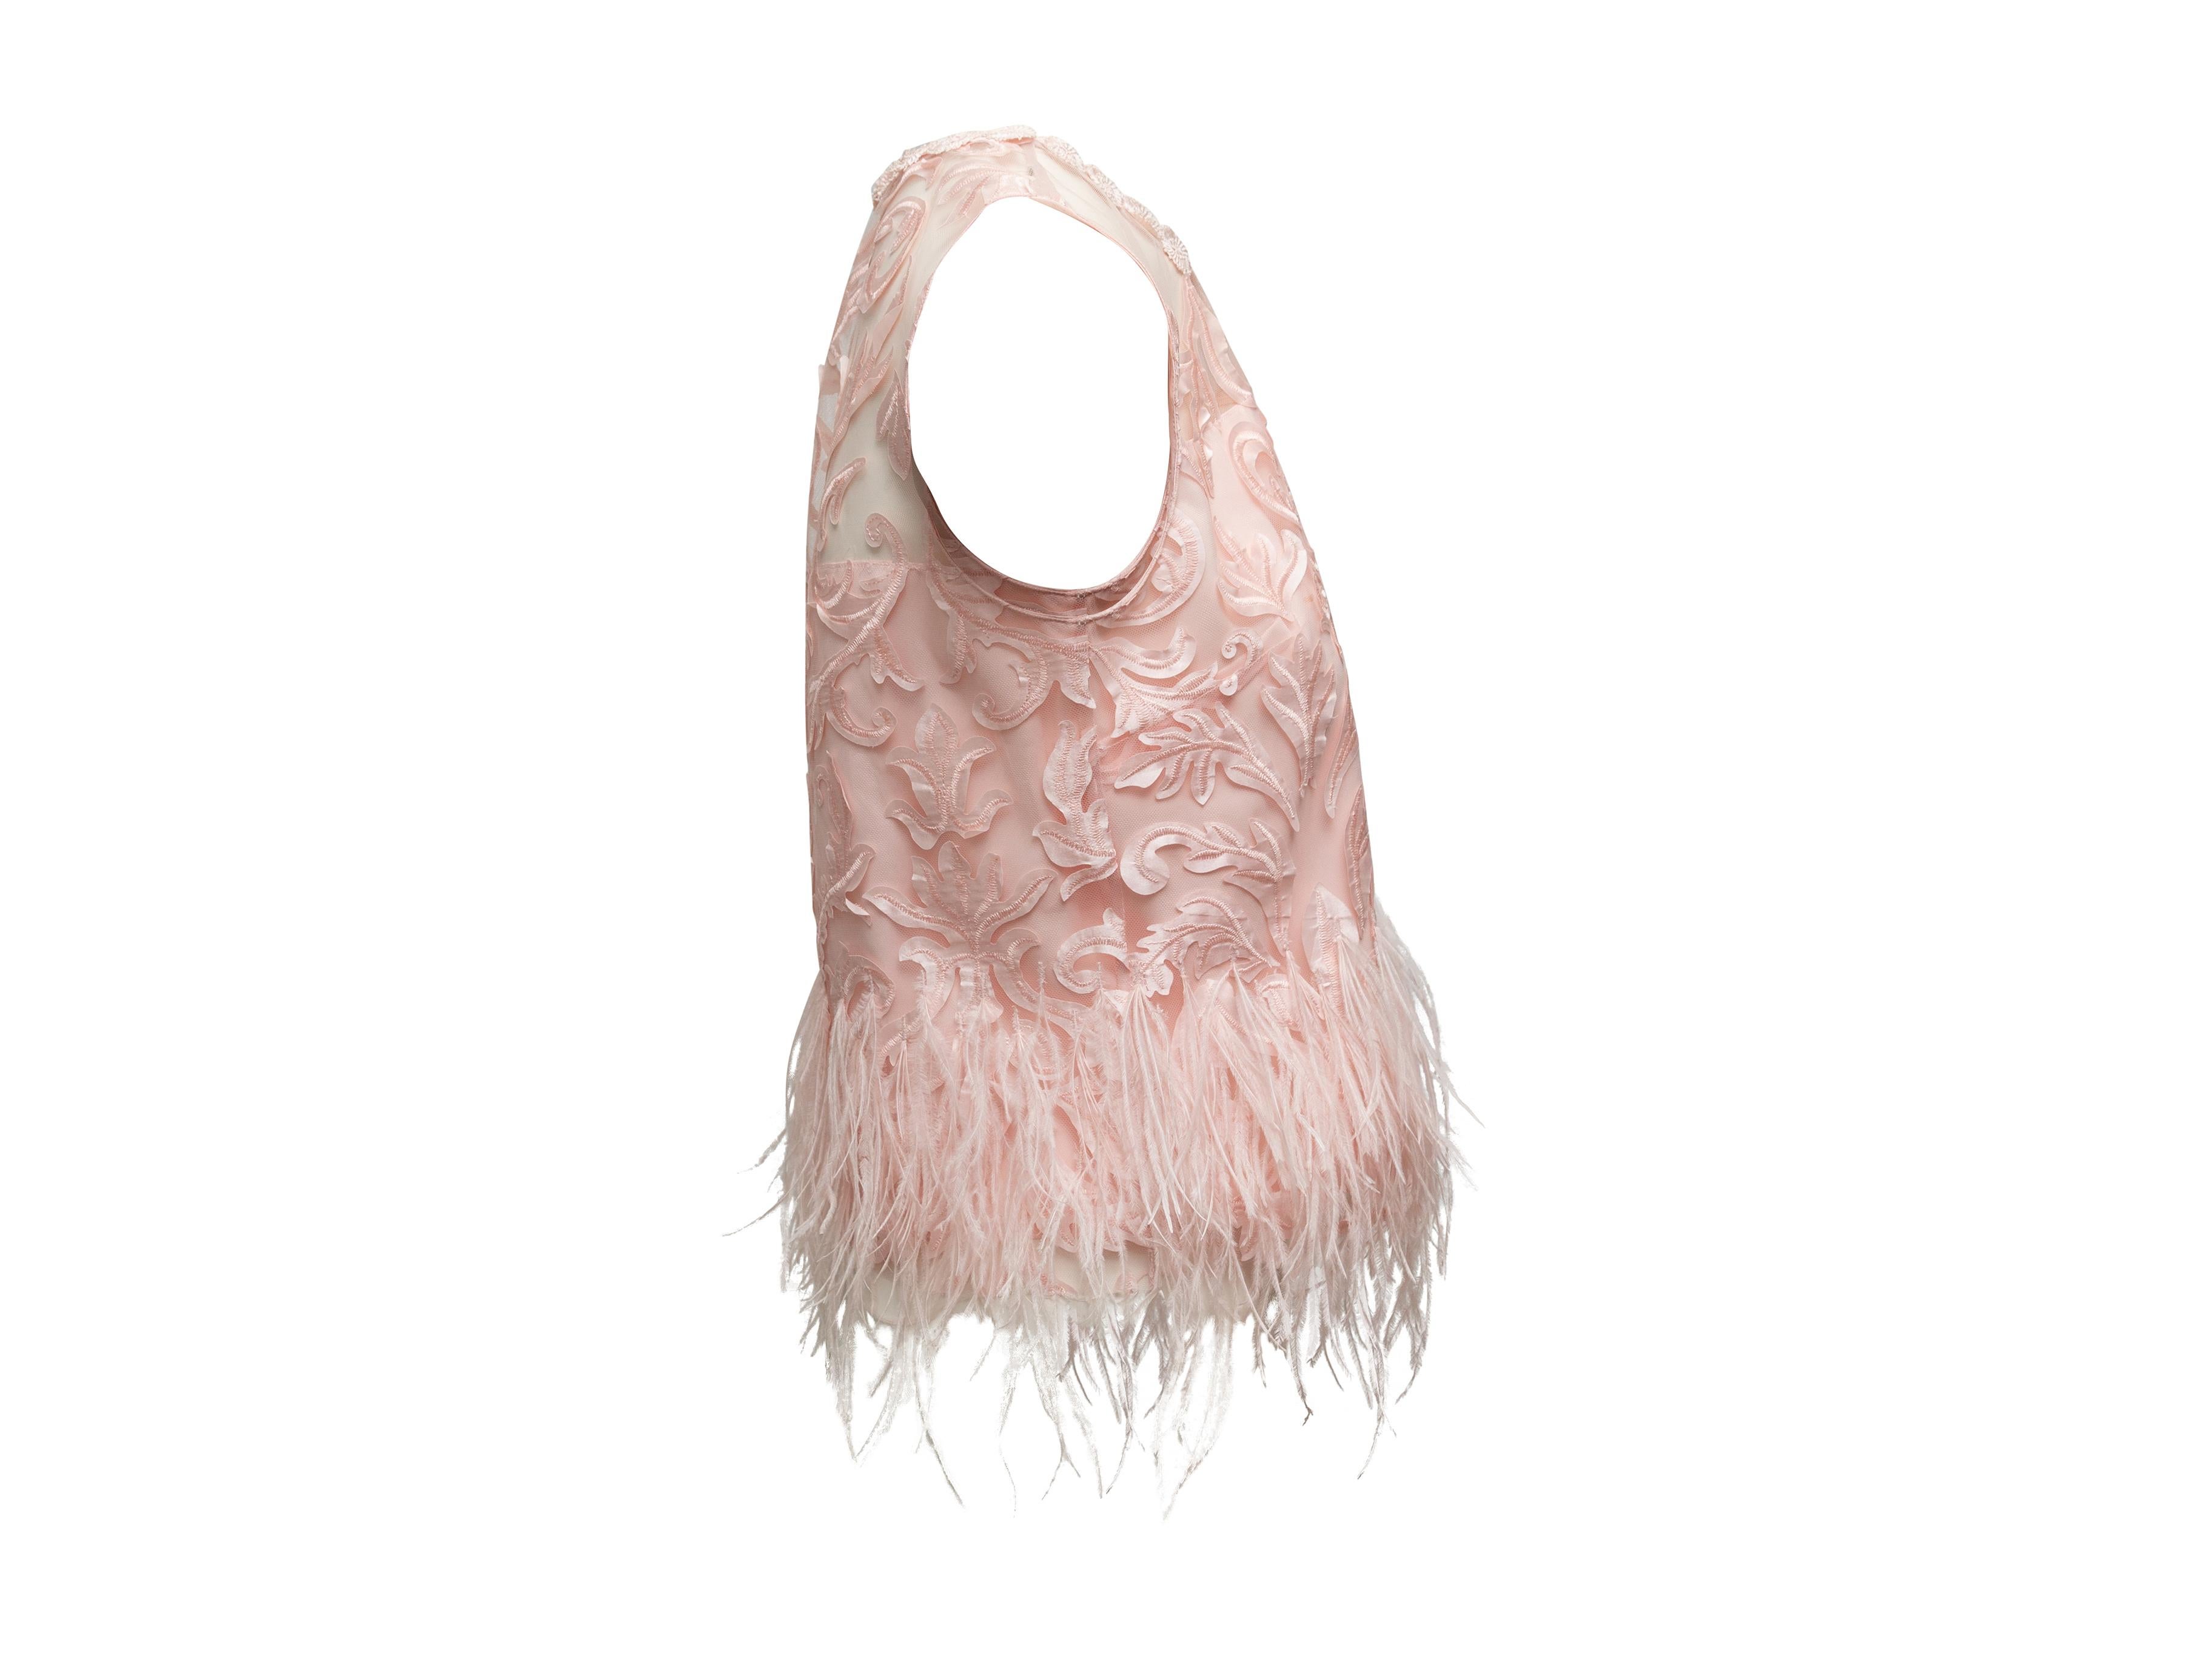 Product details: Light pink sleeveless top by Elie Tahari. Lace trim at crew neck. Applique embroidered detailing throughout. Ostrich feather trim at hem. 37